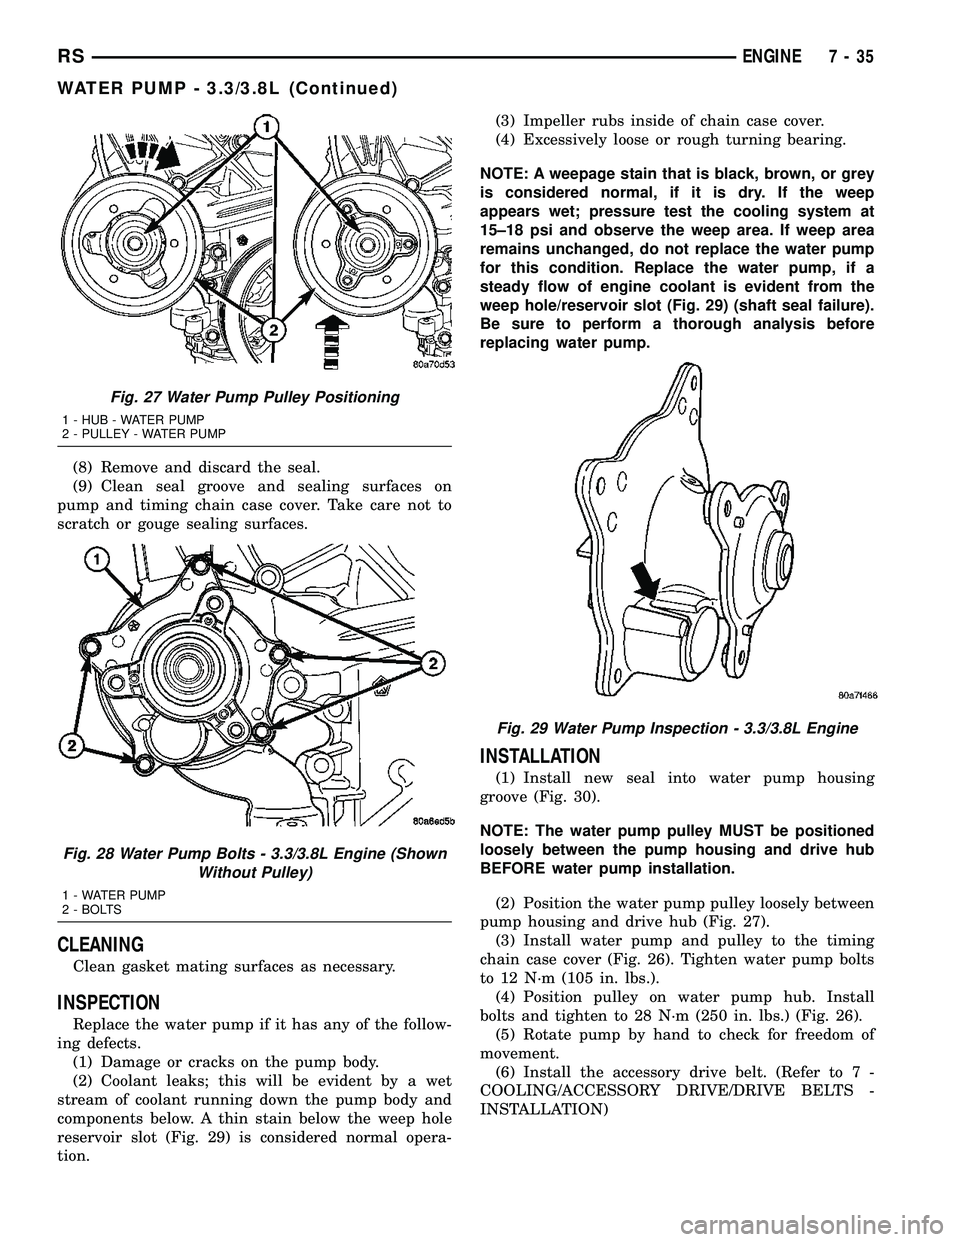 CHRYSLER CARAVAN 2005  Service Manual (8) Remove and discard the seal.
(9) Clean seal groove and sealing surfaces on
pump and timing chain case cover. Take care not to
scratch or gouge sealing surfaces.
CLEANING
Clean gasket mating surfac